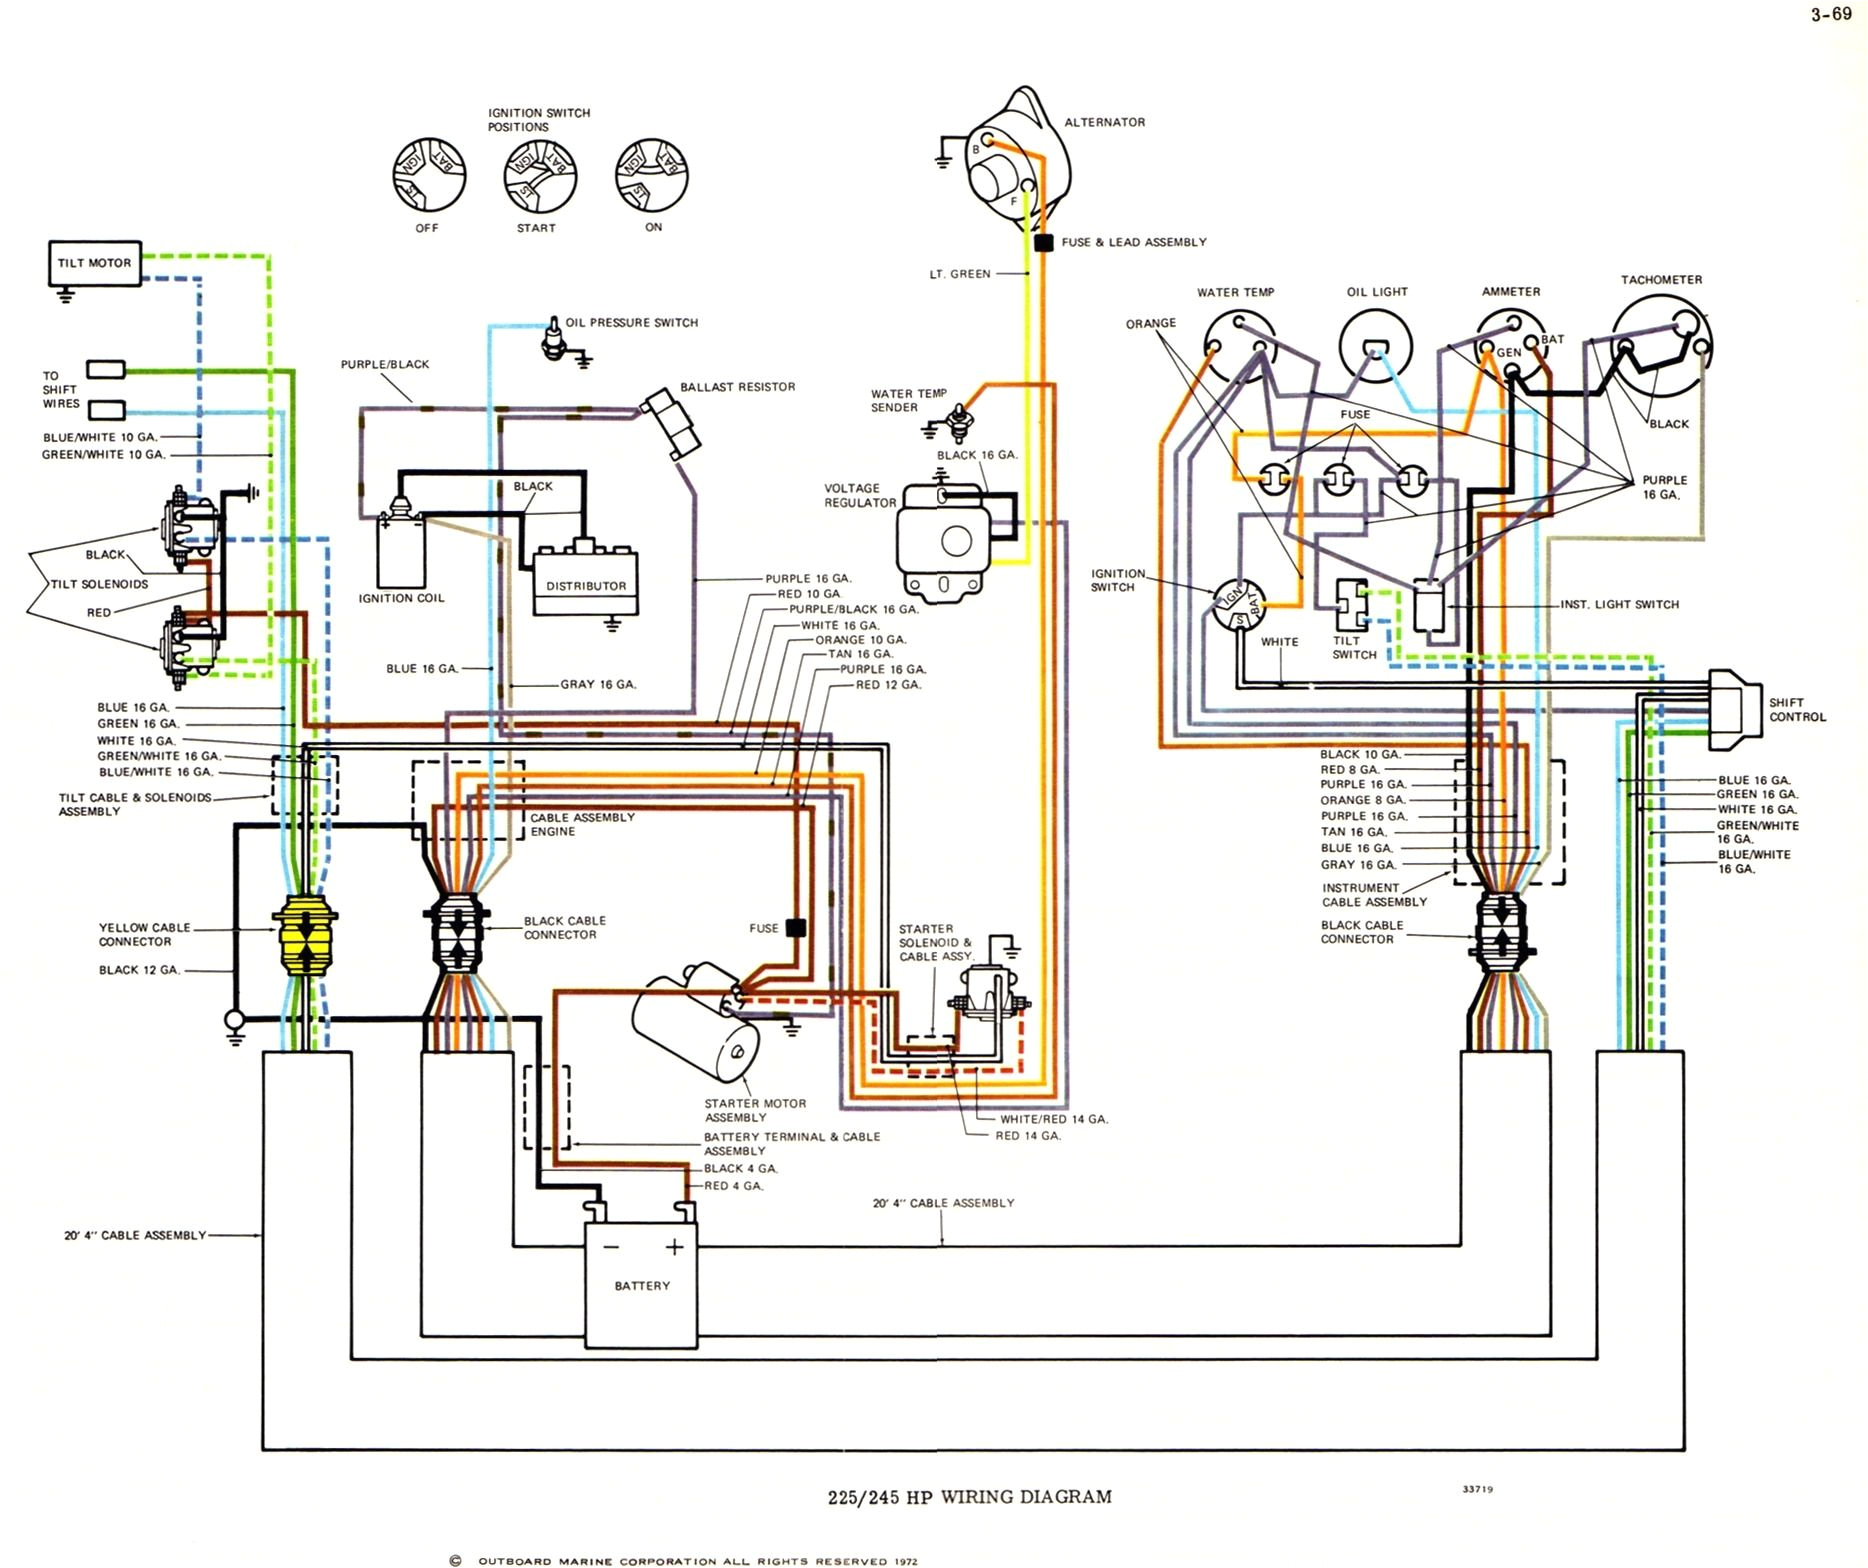 yamaha outboard electrical wiring diagram wiringdiagram org yamaha outboard wiring diagrams online yamaha outboard electrical wiring